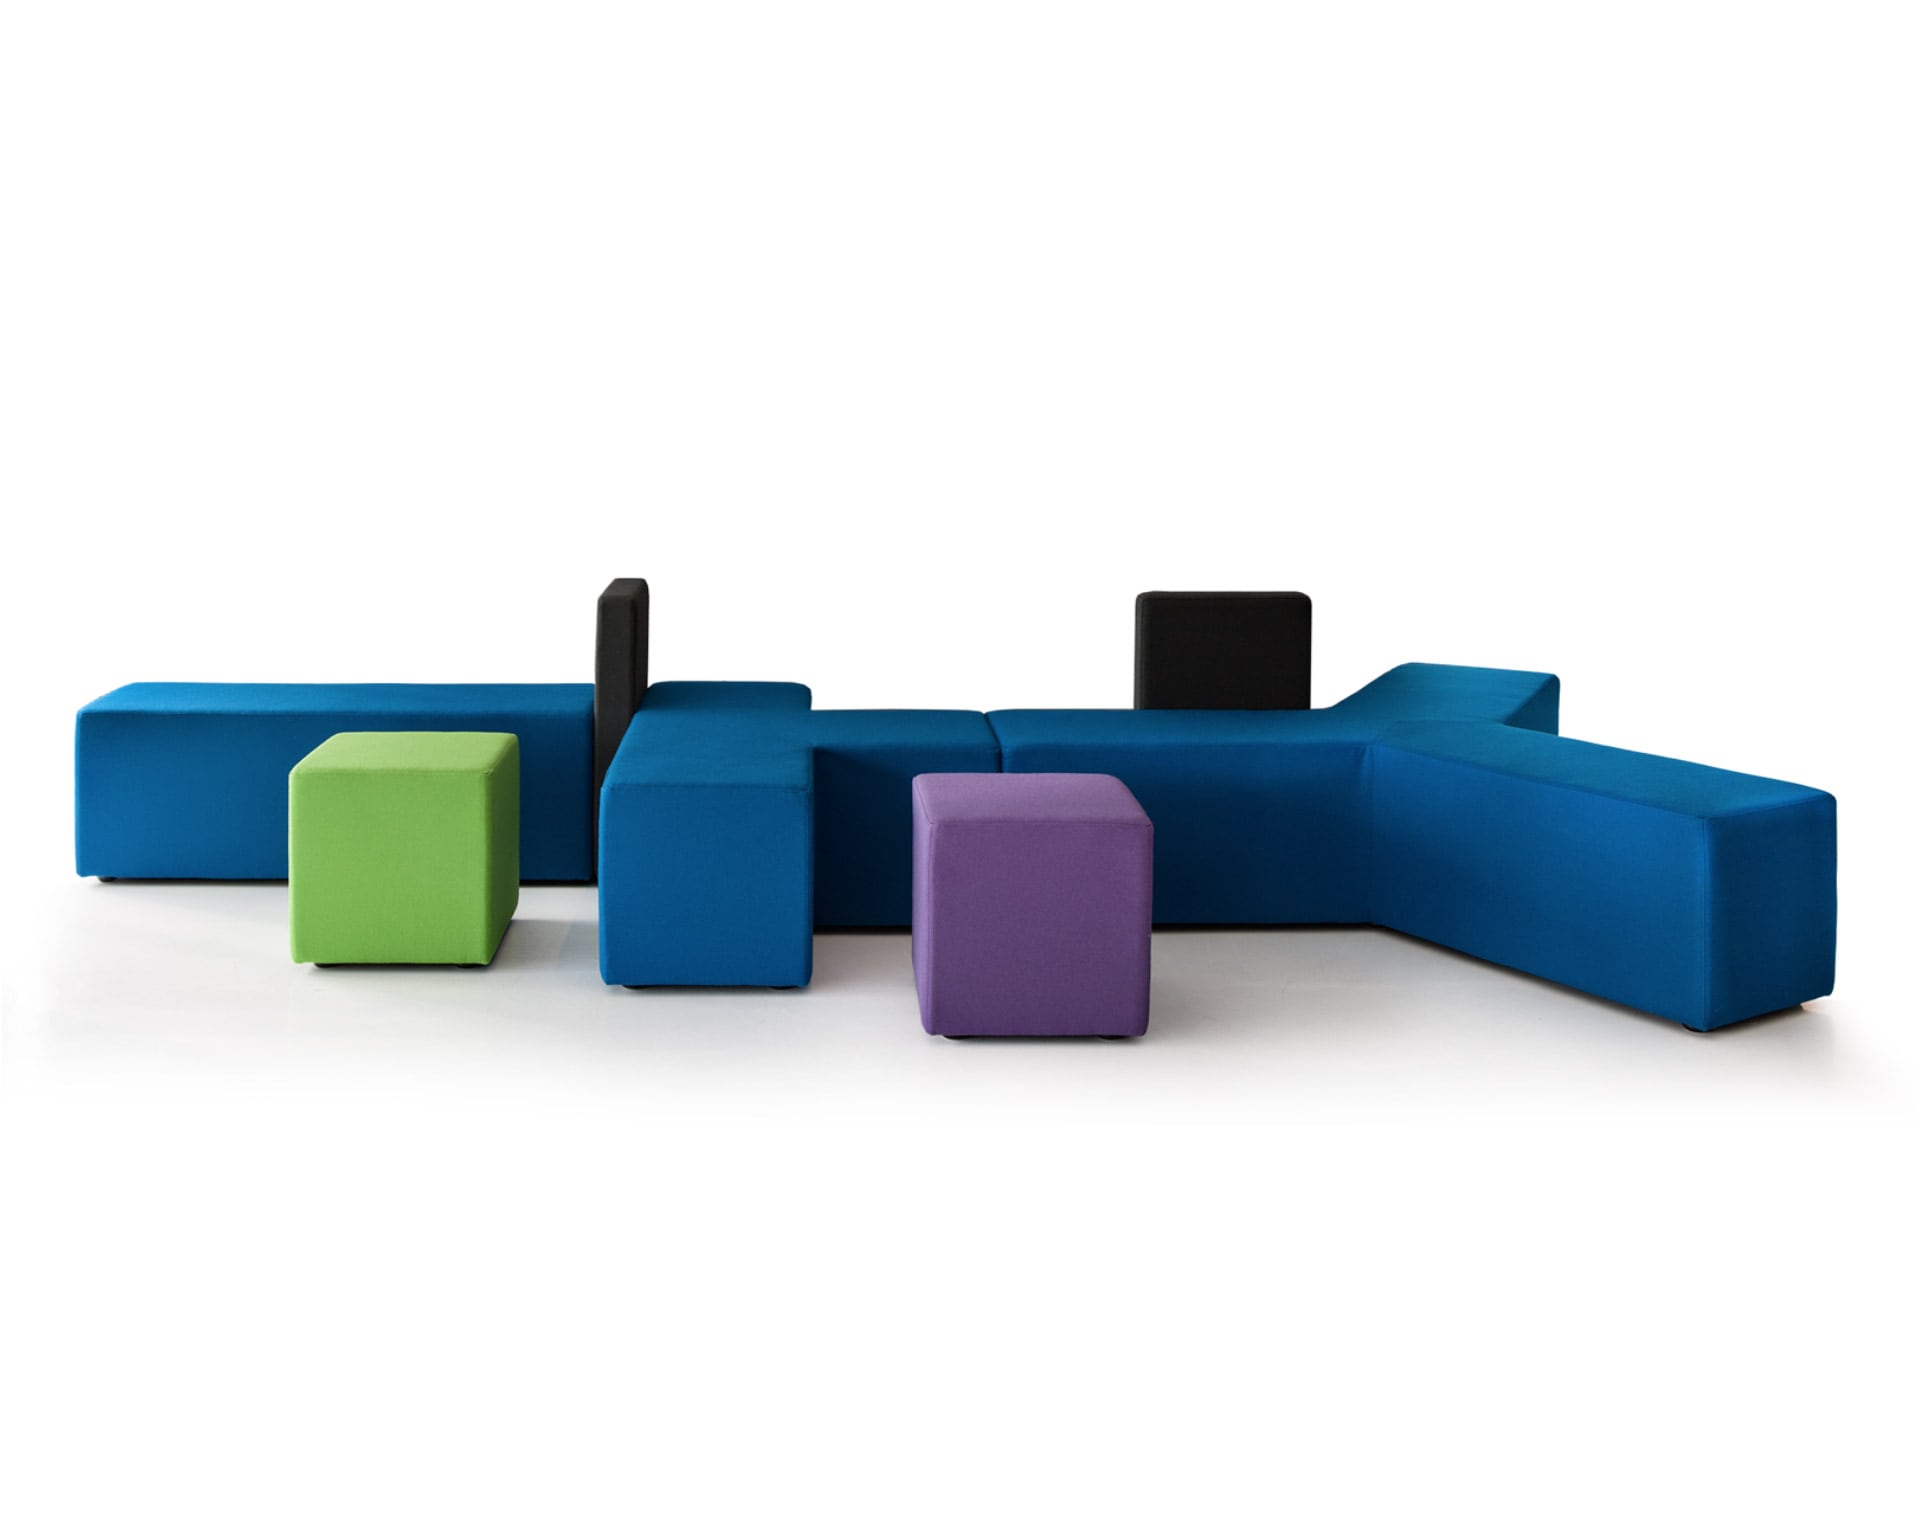 New Modular Seating Range released by UFL